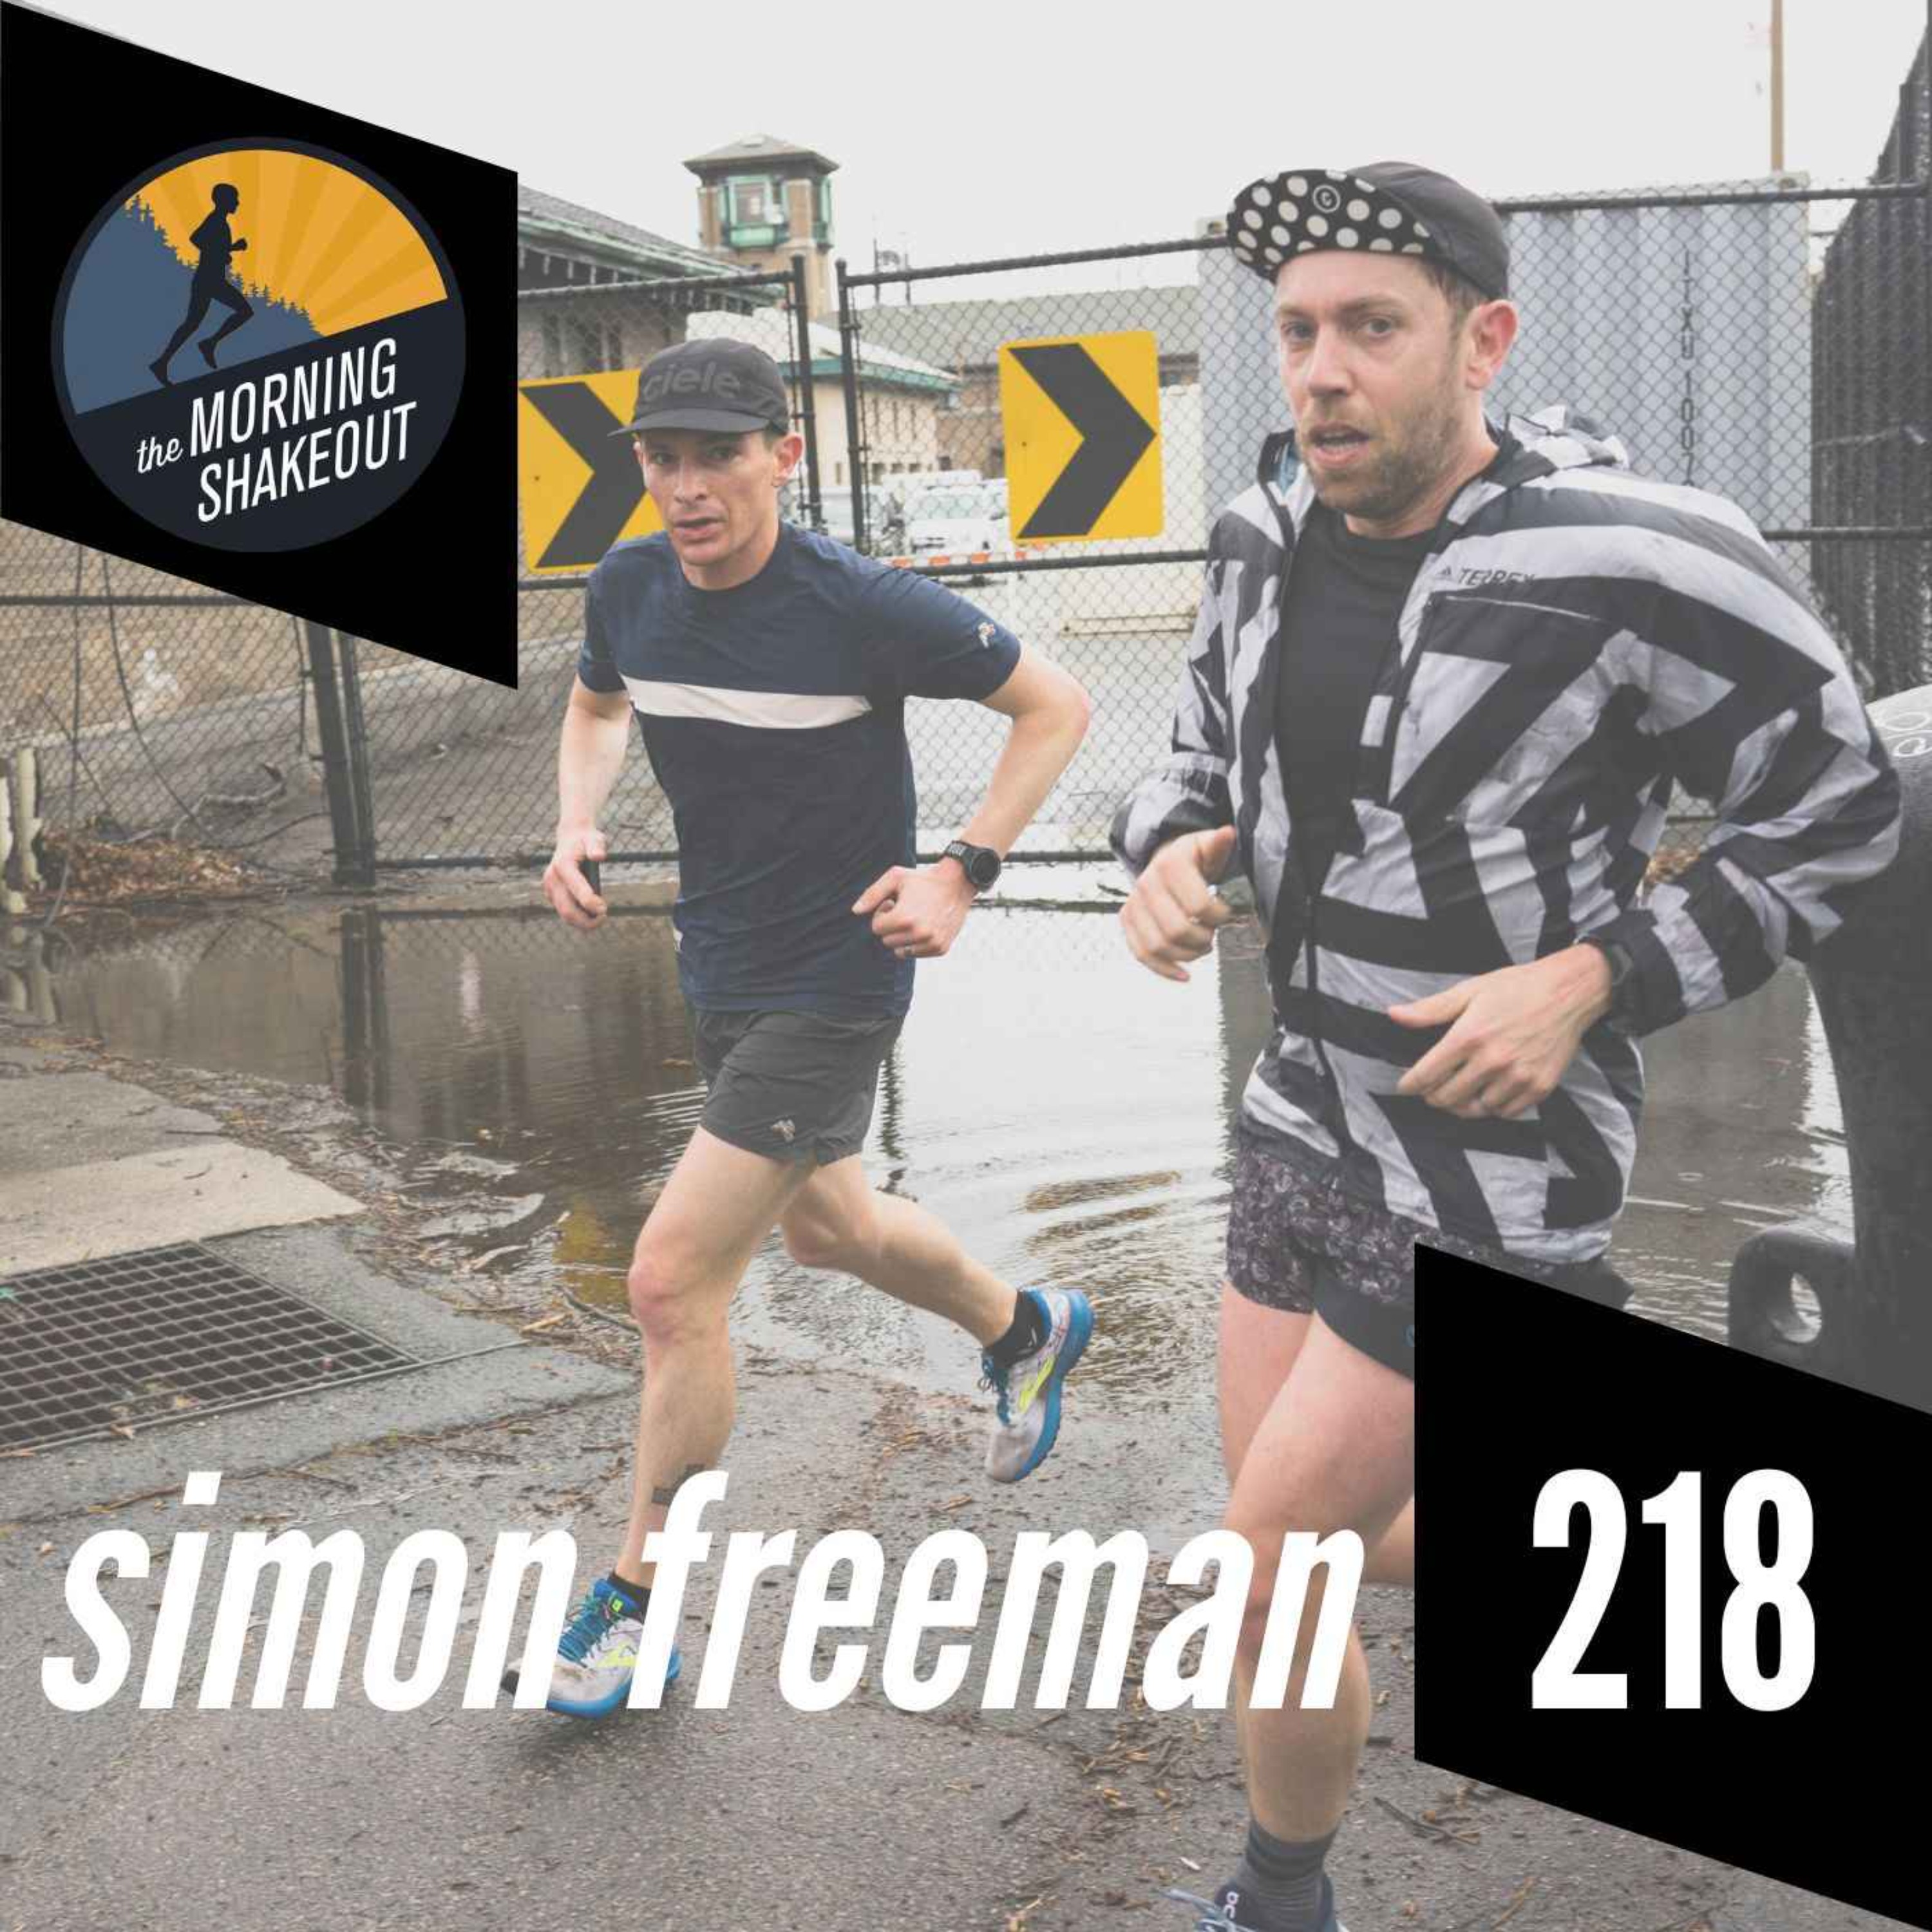 Episode 218 | Simon Freeman and Mario Fraioli on Emerging Brands and Trends in Running